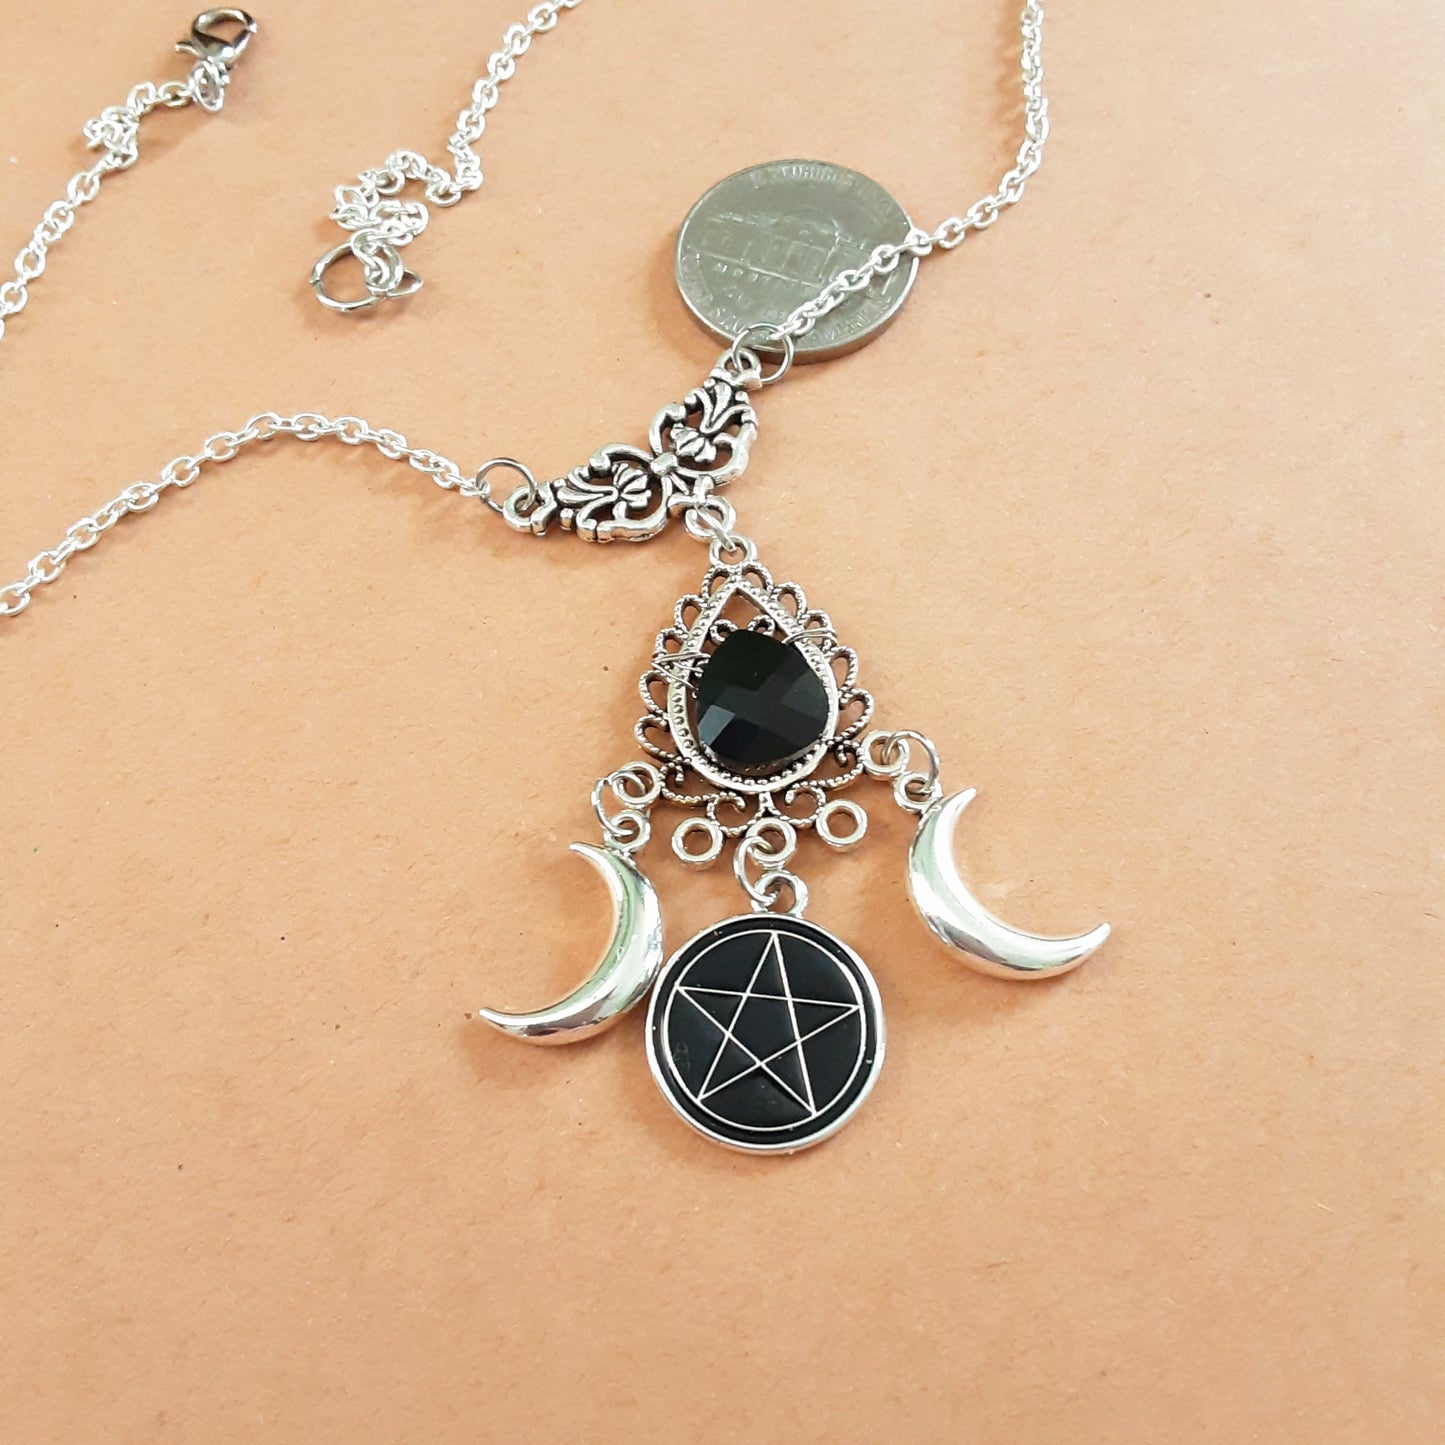 Witch necklace with pentacle and crescent moons